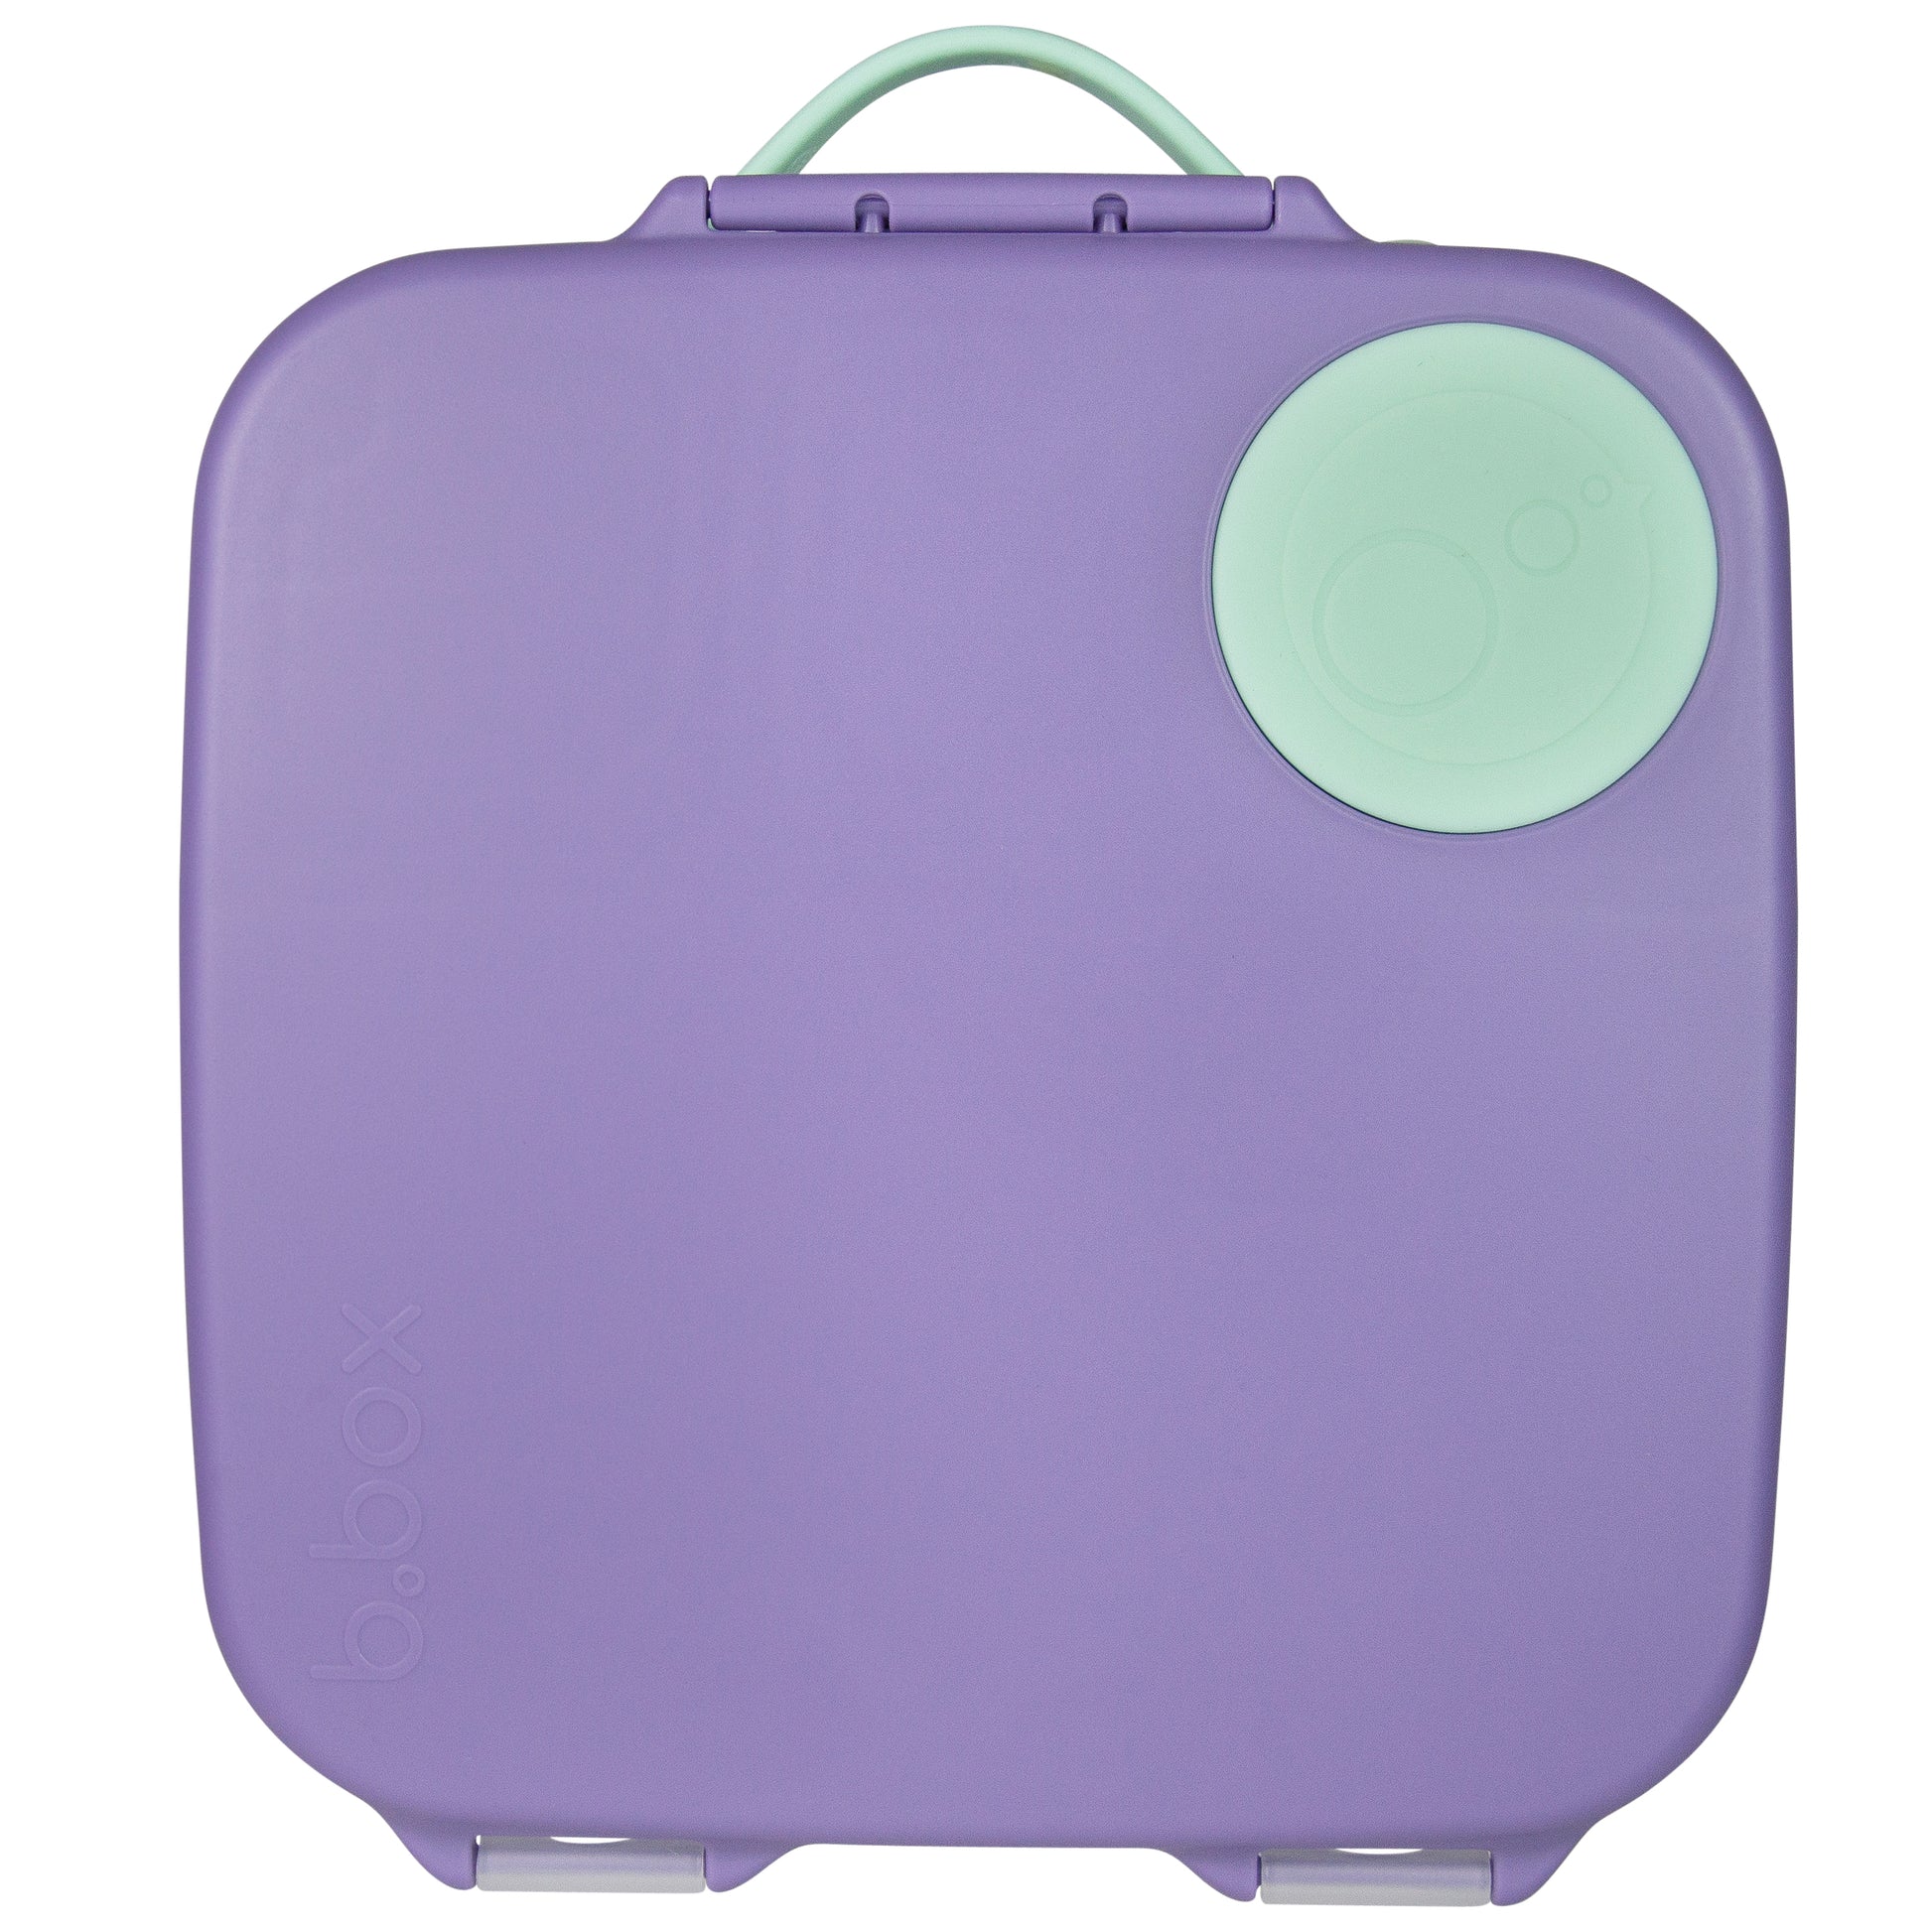 b.box Kids Reusable Lunchbox in Lilac Pop available at Bear & Moo